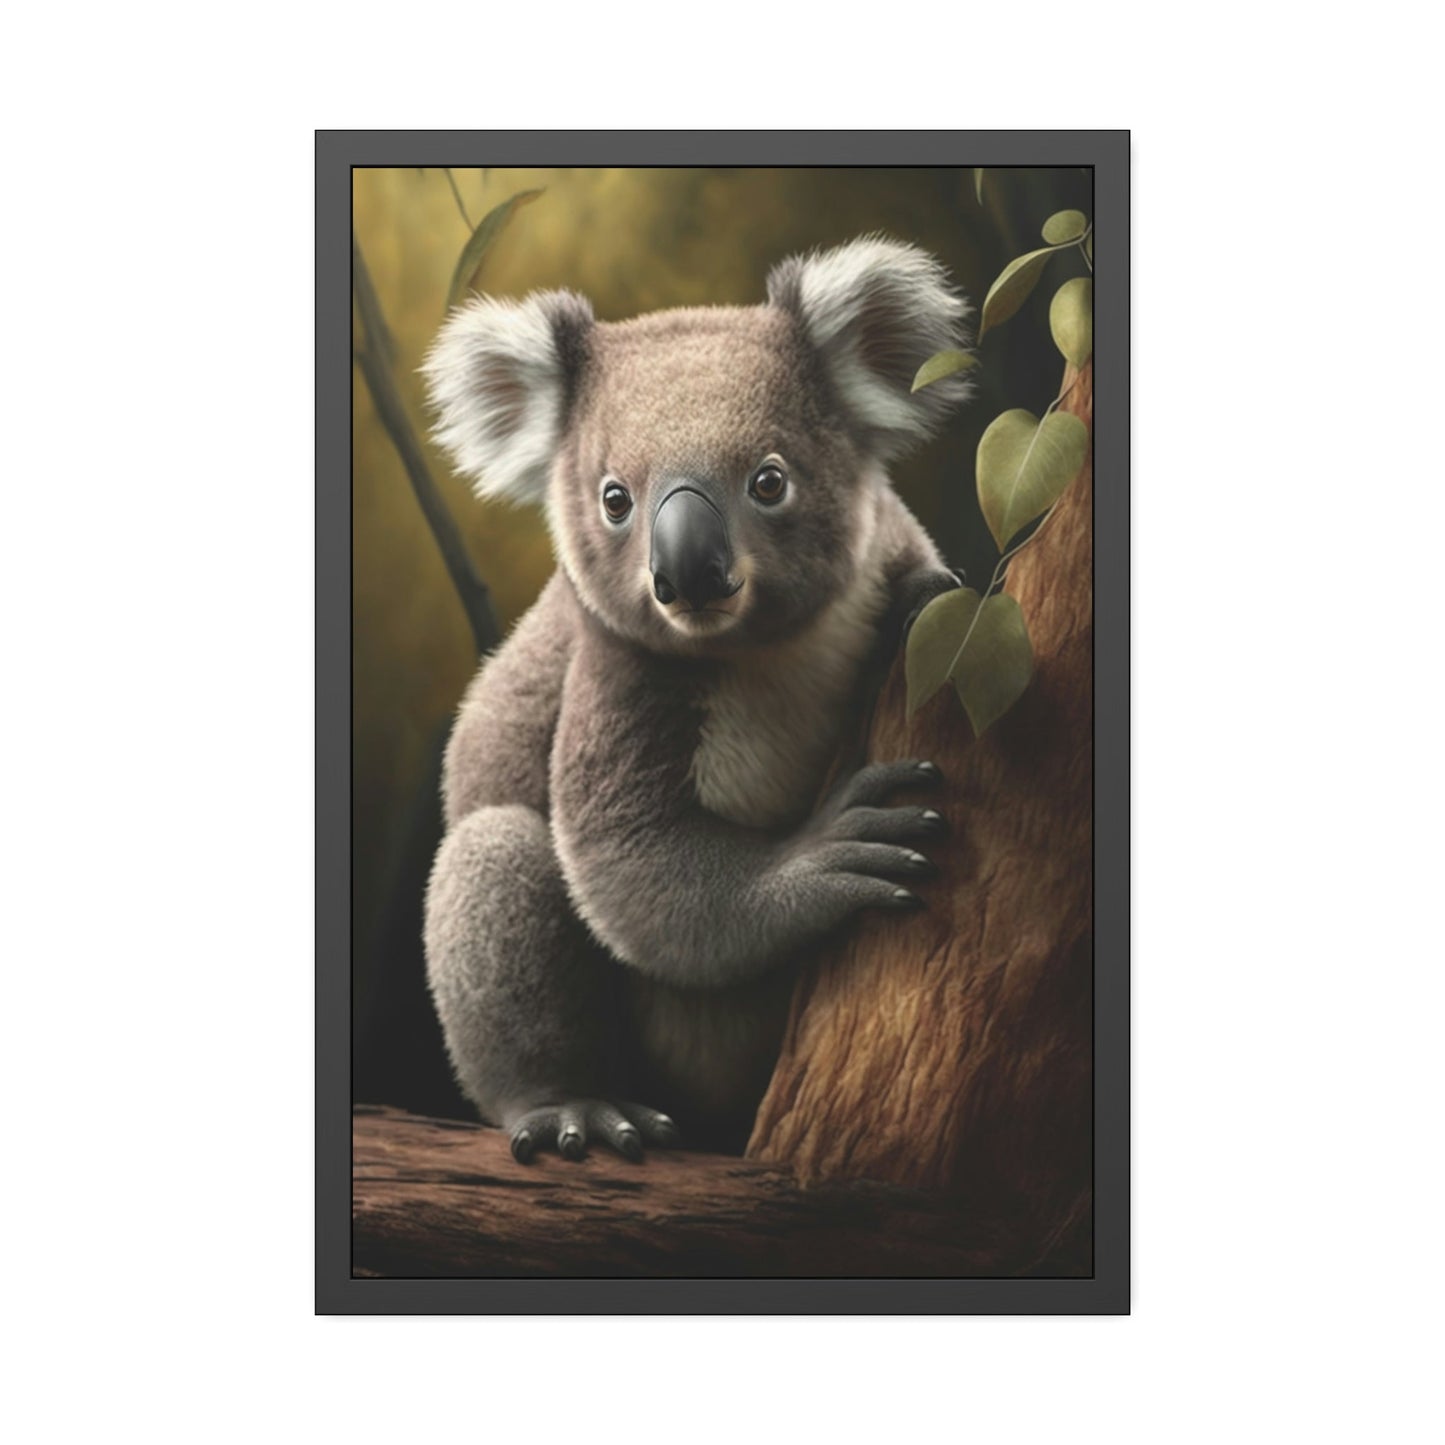 Eucalyptus Dreams: A Stunning and Relaxing Koala Painting on Canvas